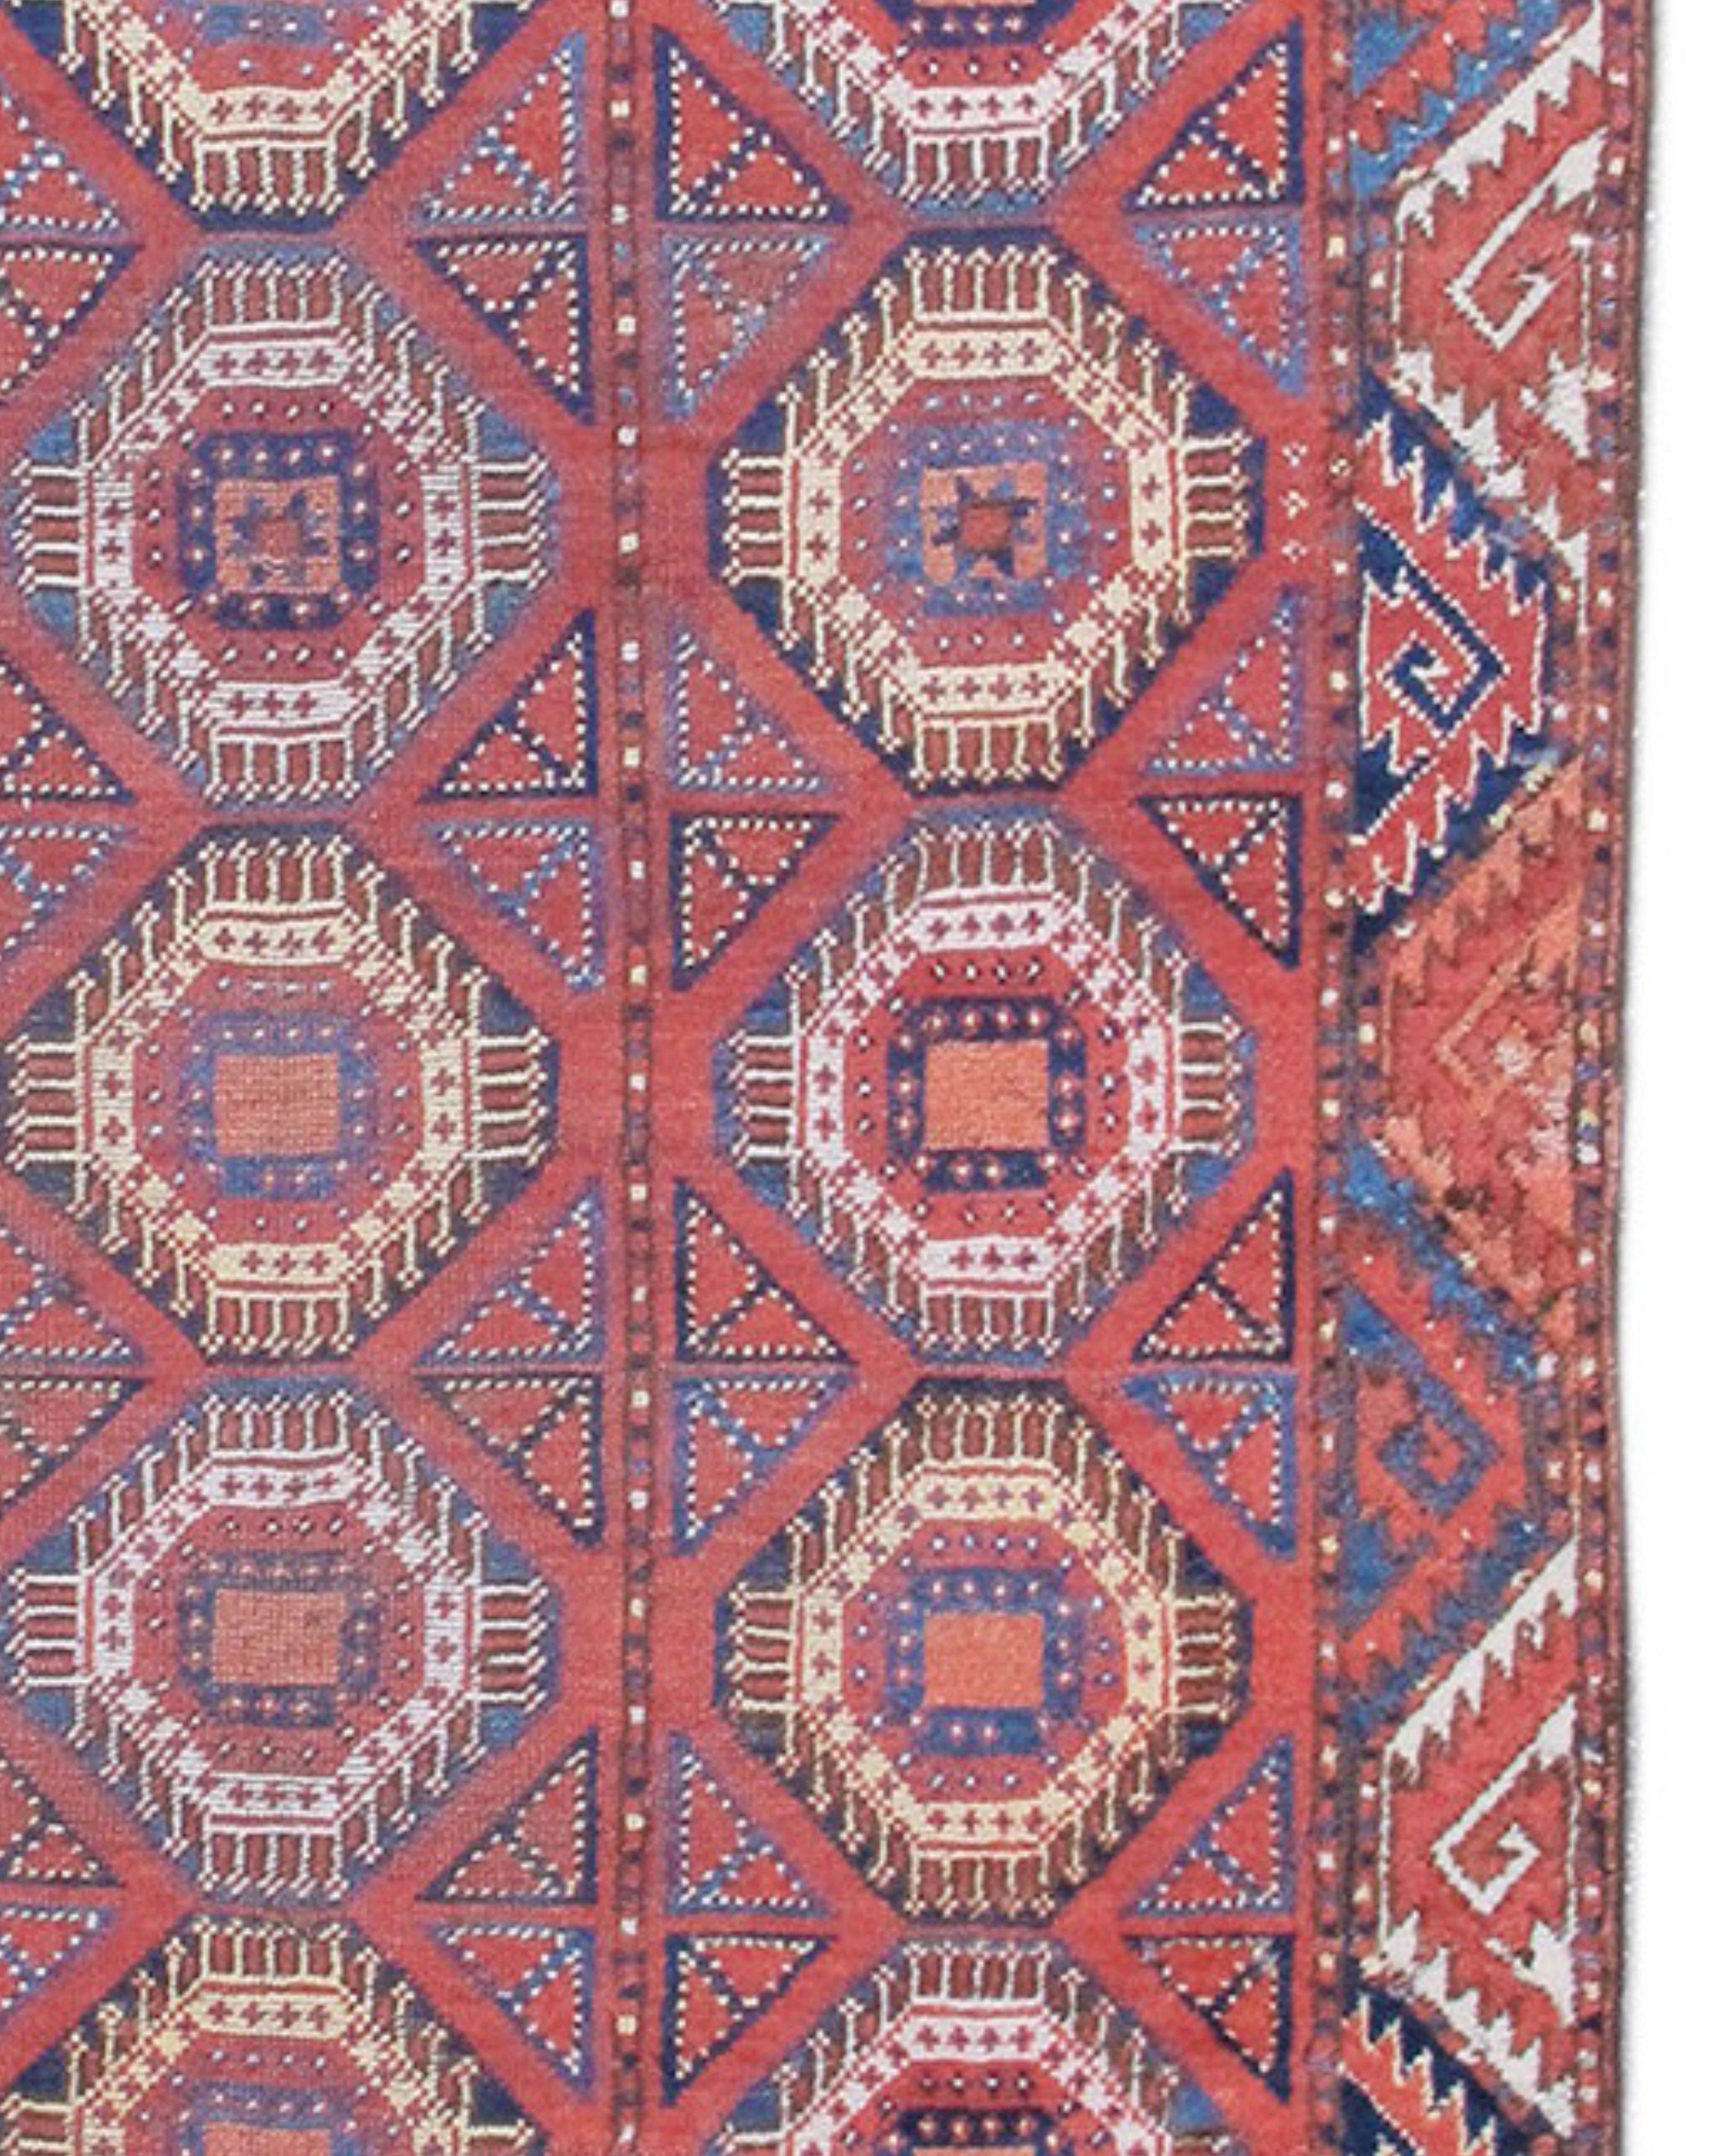 Ersari Long Rug, 19th Century

Woven along the banks of the Oxus River in Central Asia, this long and narrow Bashir carpet represents a distinctive form of Turkmen weaving. The town Bashir is located in what is now Uzbekistan. Its history as a